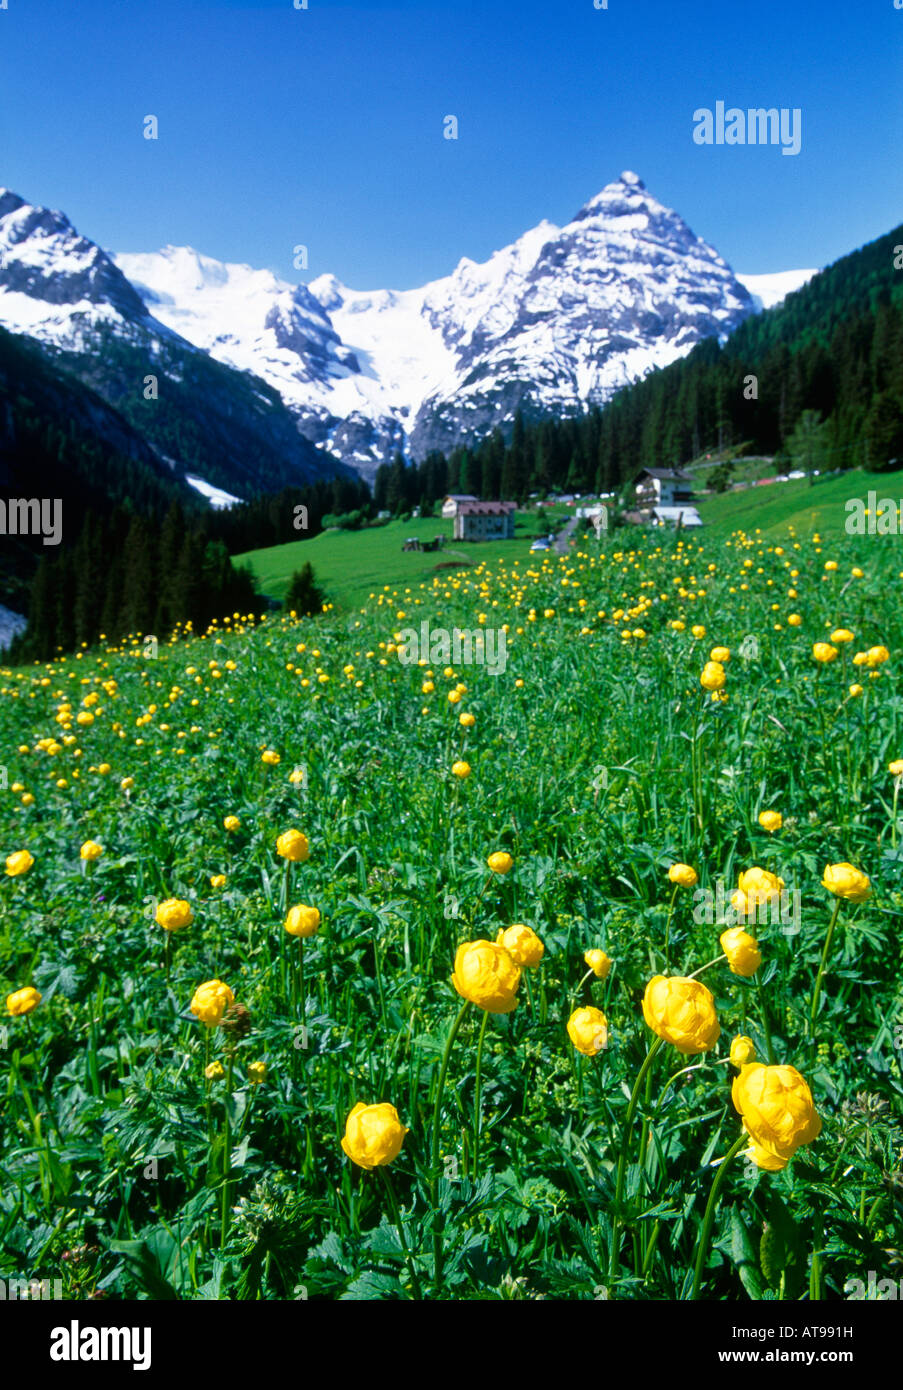 Flower filled field in the town of Trafoi in Alto Adige, Northern Italy in spring Stock Photo